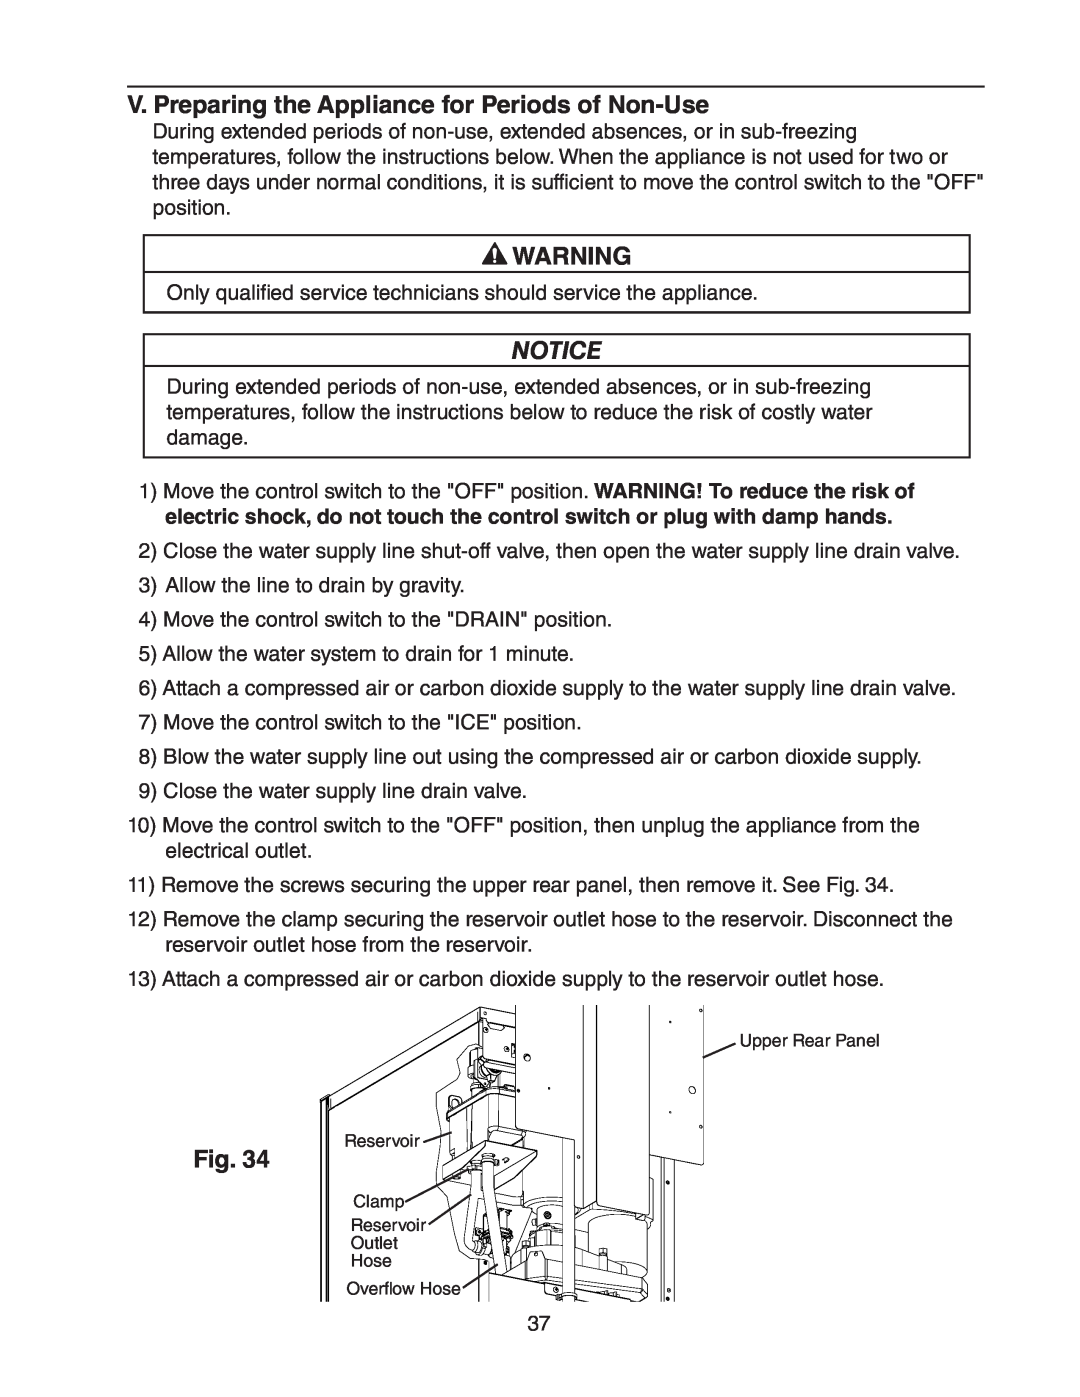 Hoshizaki C-101BAH-DS, C-101BAH-ADDS instruction manual V. Preparing the Appliance for Periods of Non-Use, Upper Rear Panel 